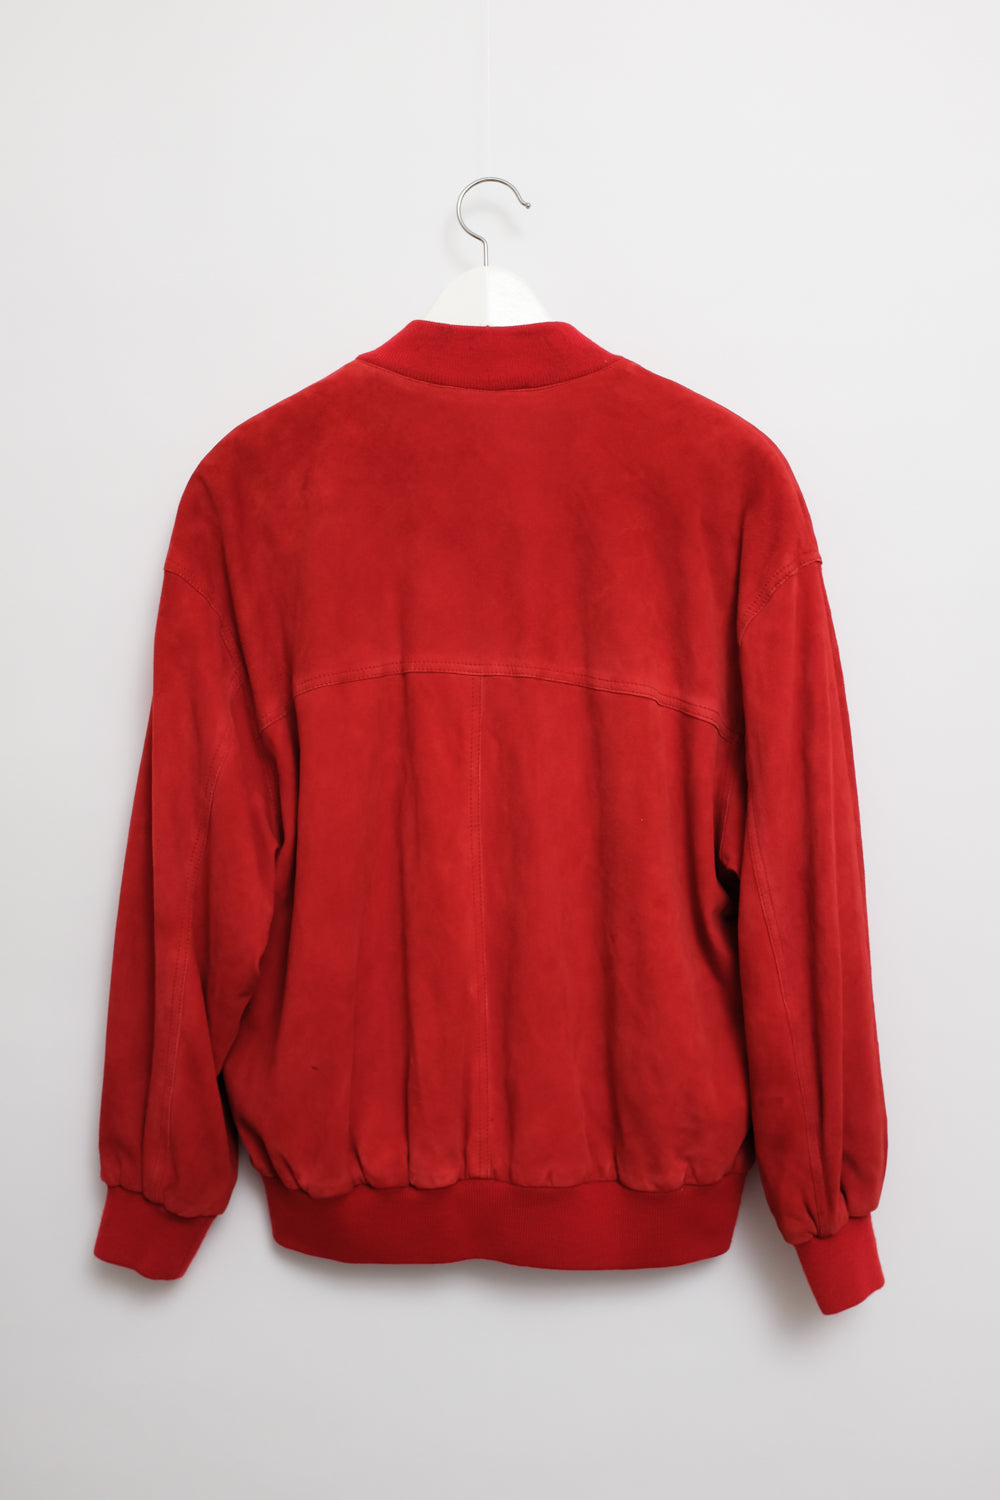 SUEDE LEATHER RED VINTAGE BOMBER